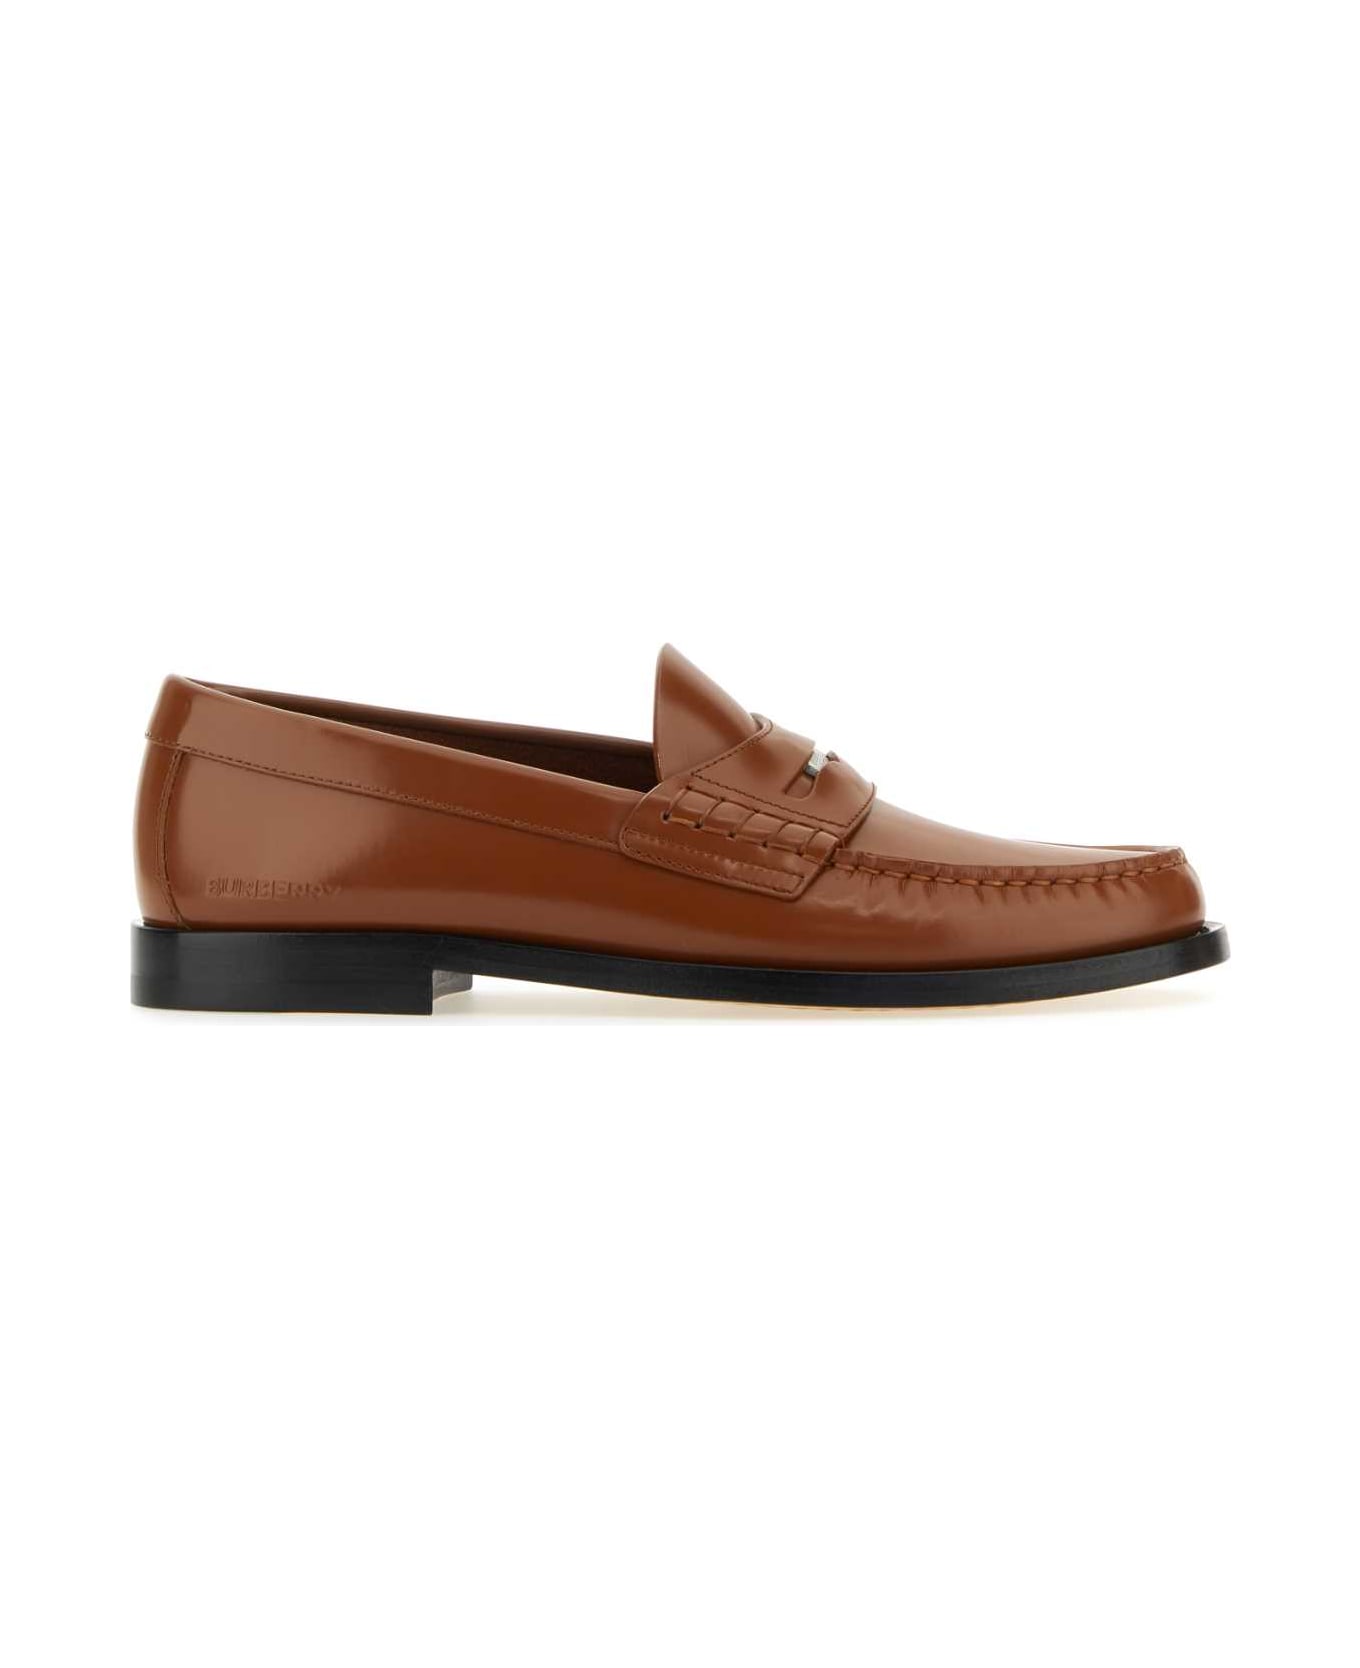 Burberry Brown Leather Loafers - WARMOAKBROWN フラットシューズ